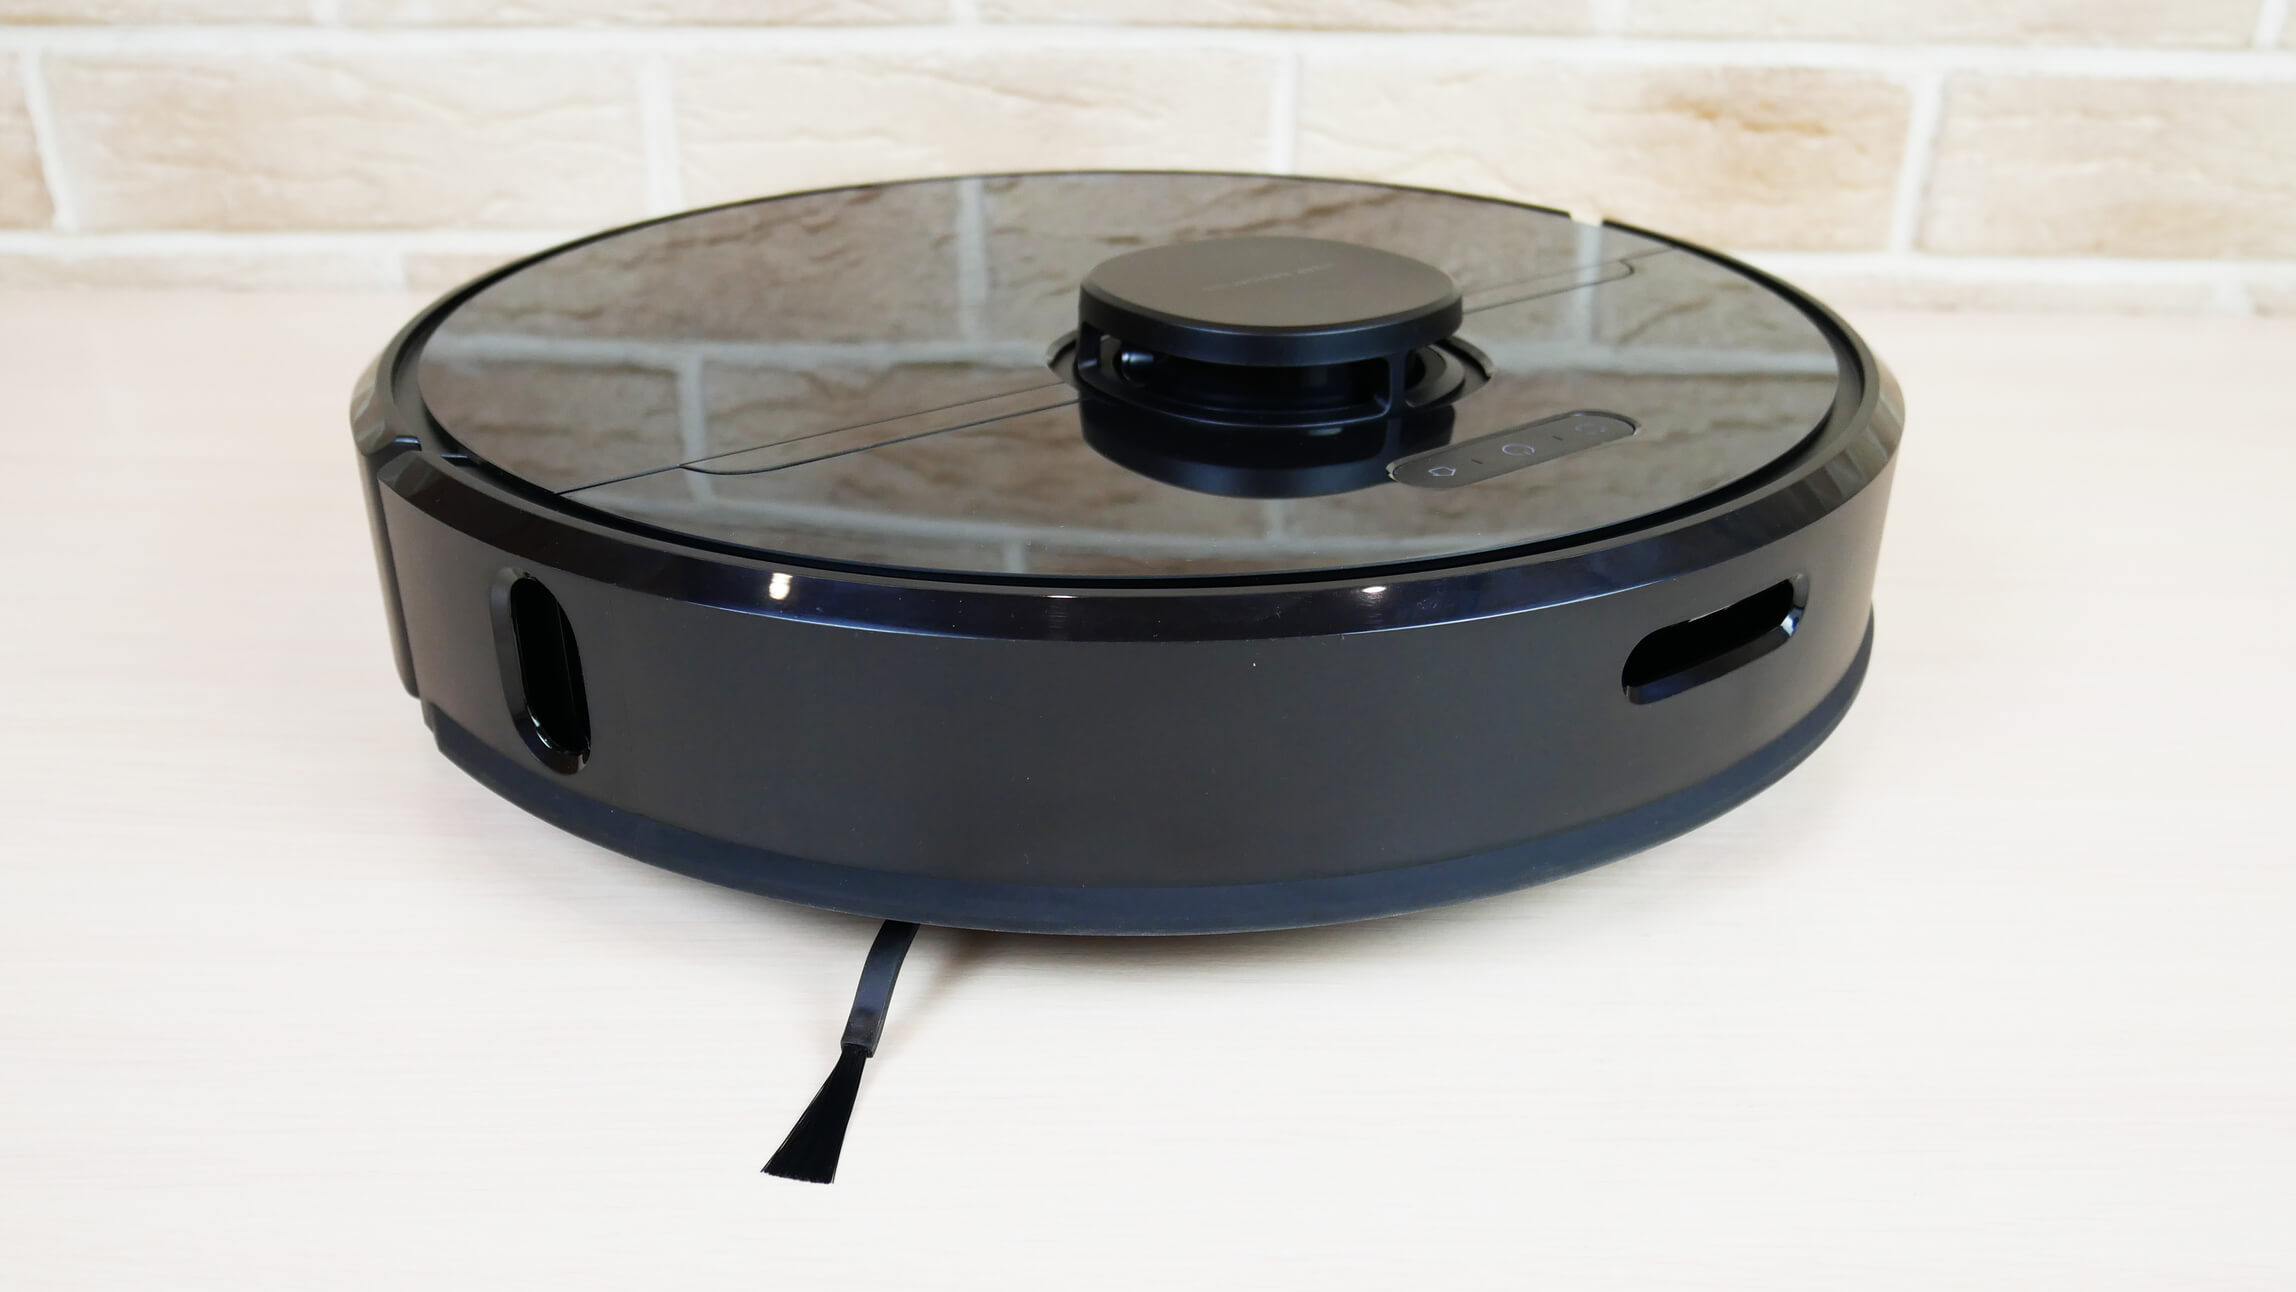 The ULTIMATE Robot Vacuum?  Dreame Bot D9 Max - Unboxing & Review 